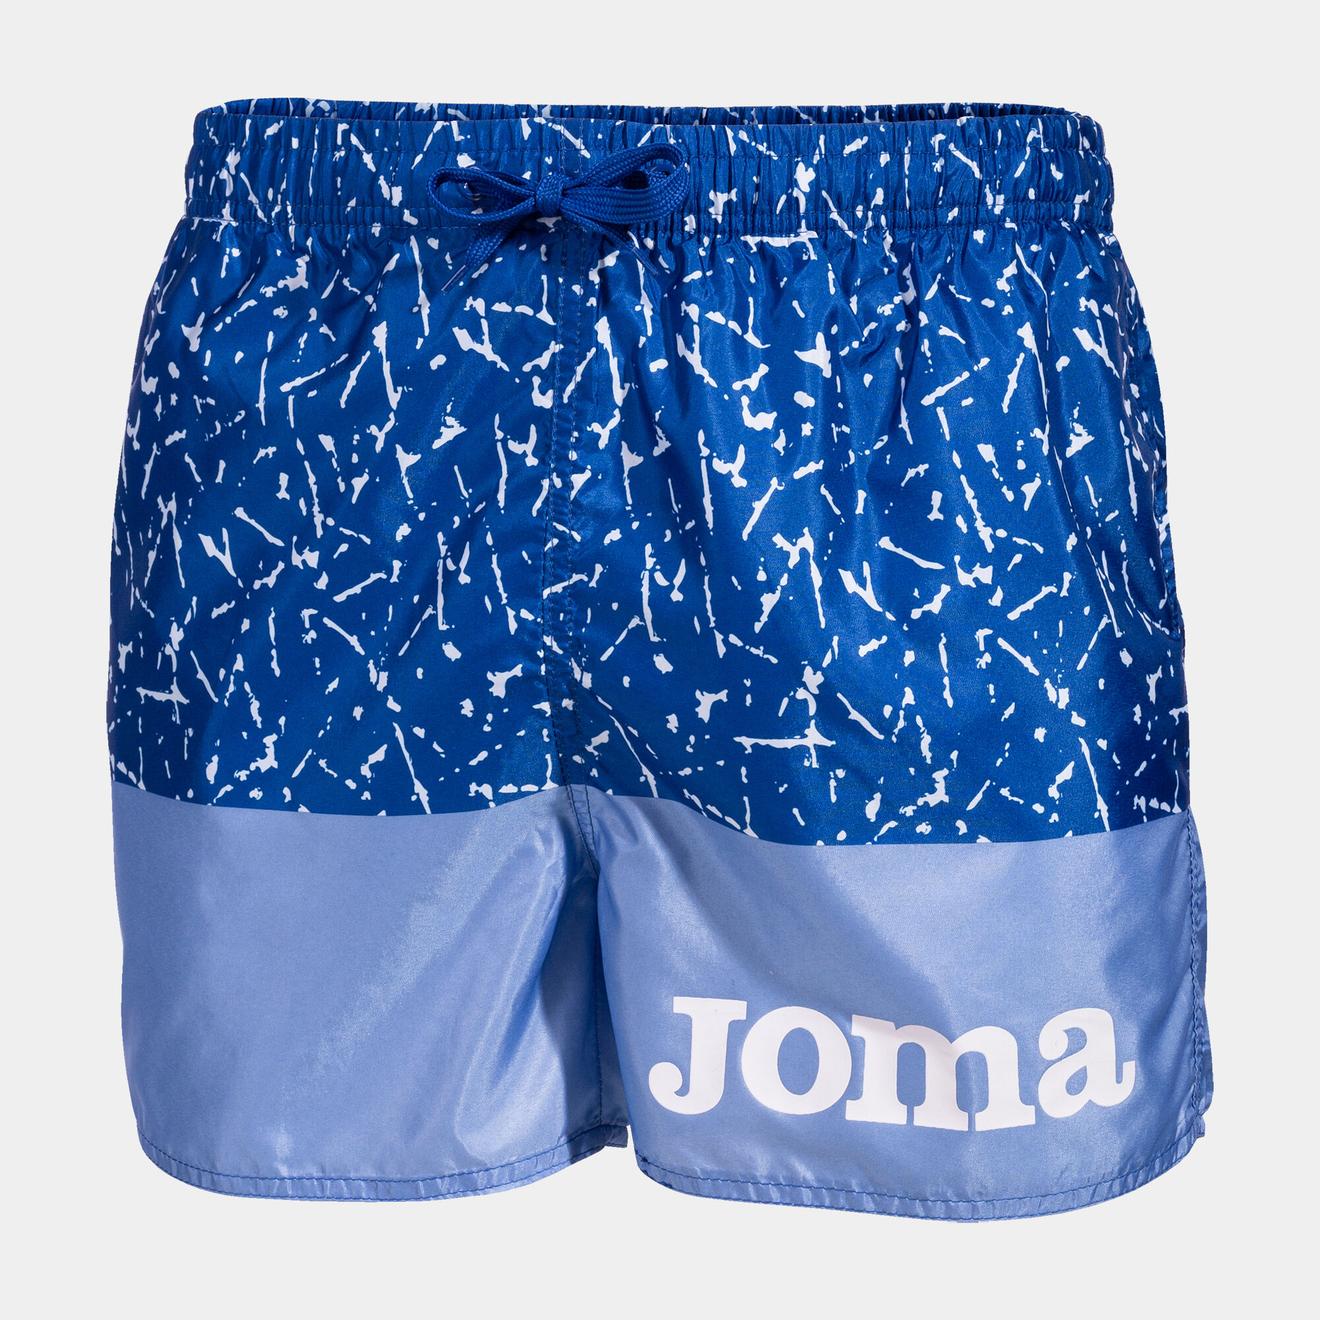 Swimming trunks man Pints royal blue blue offers at £6.99 in Joma